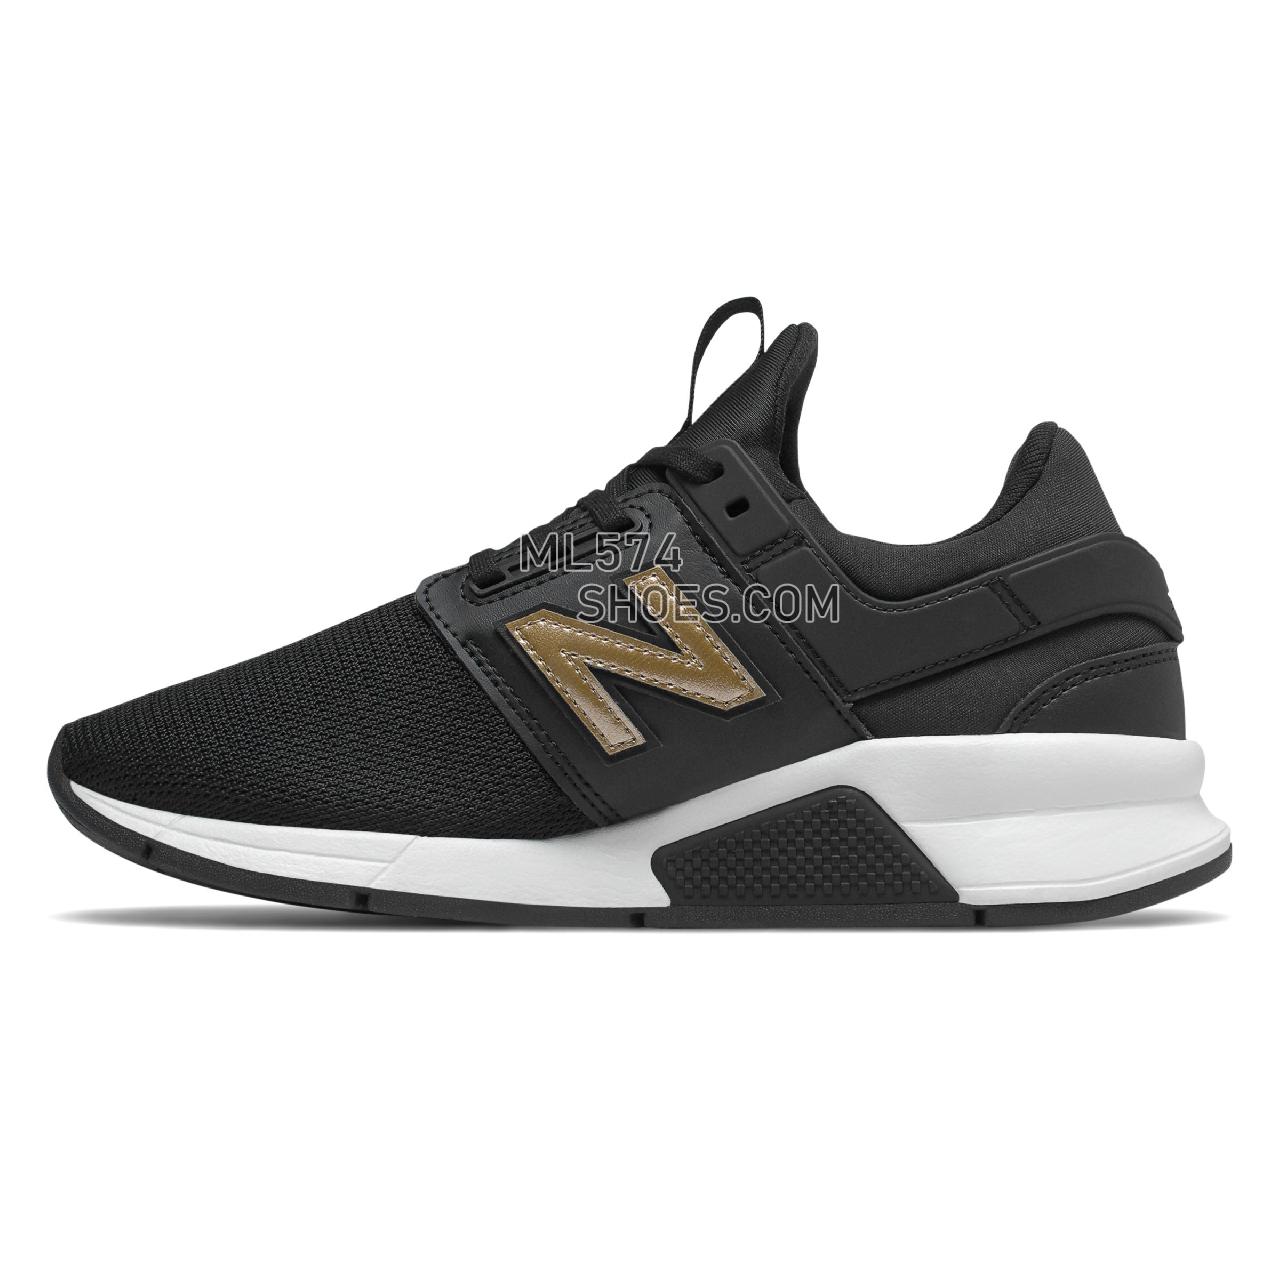 New Balance 247 - Women's Sport Style Sneakers - Black with Gold Metallic - WS247CNS